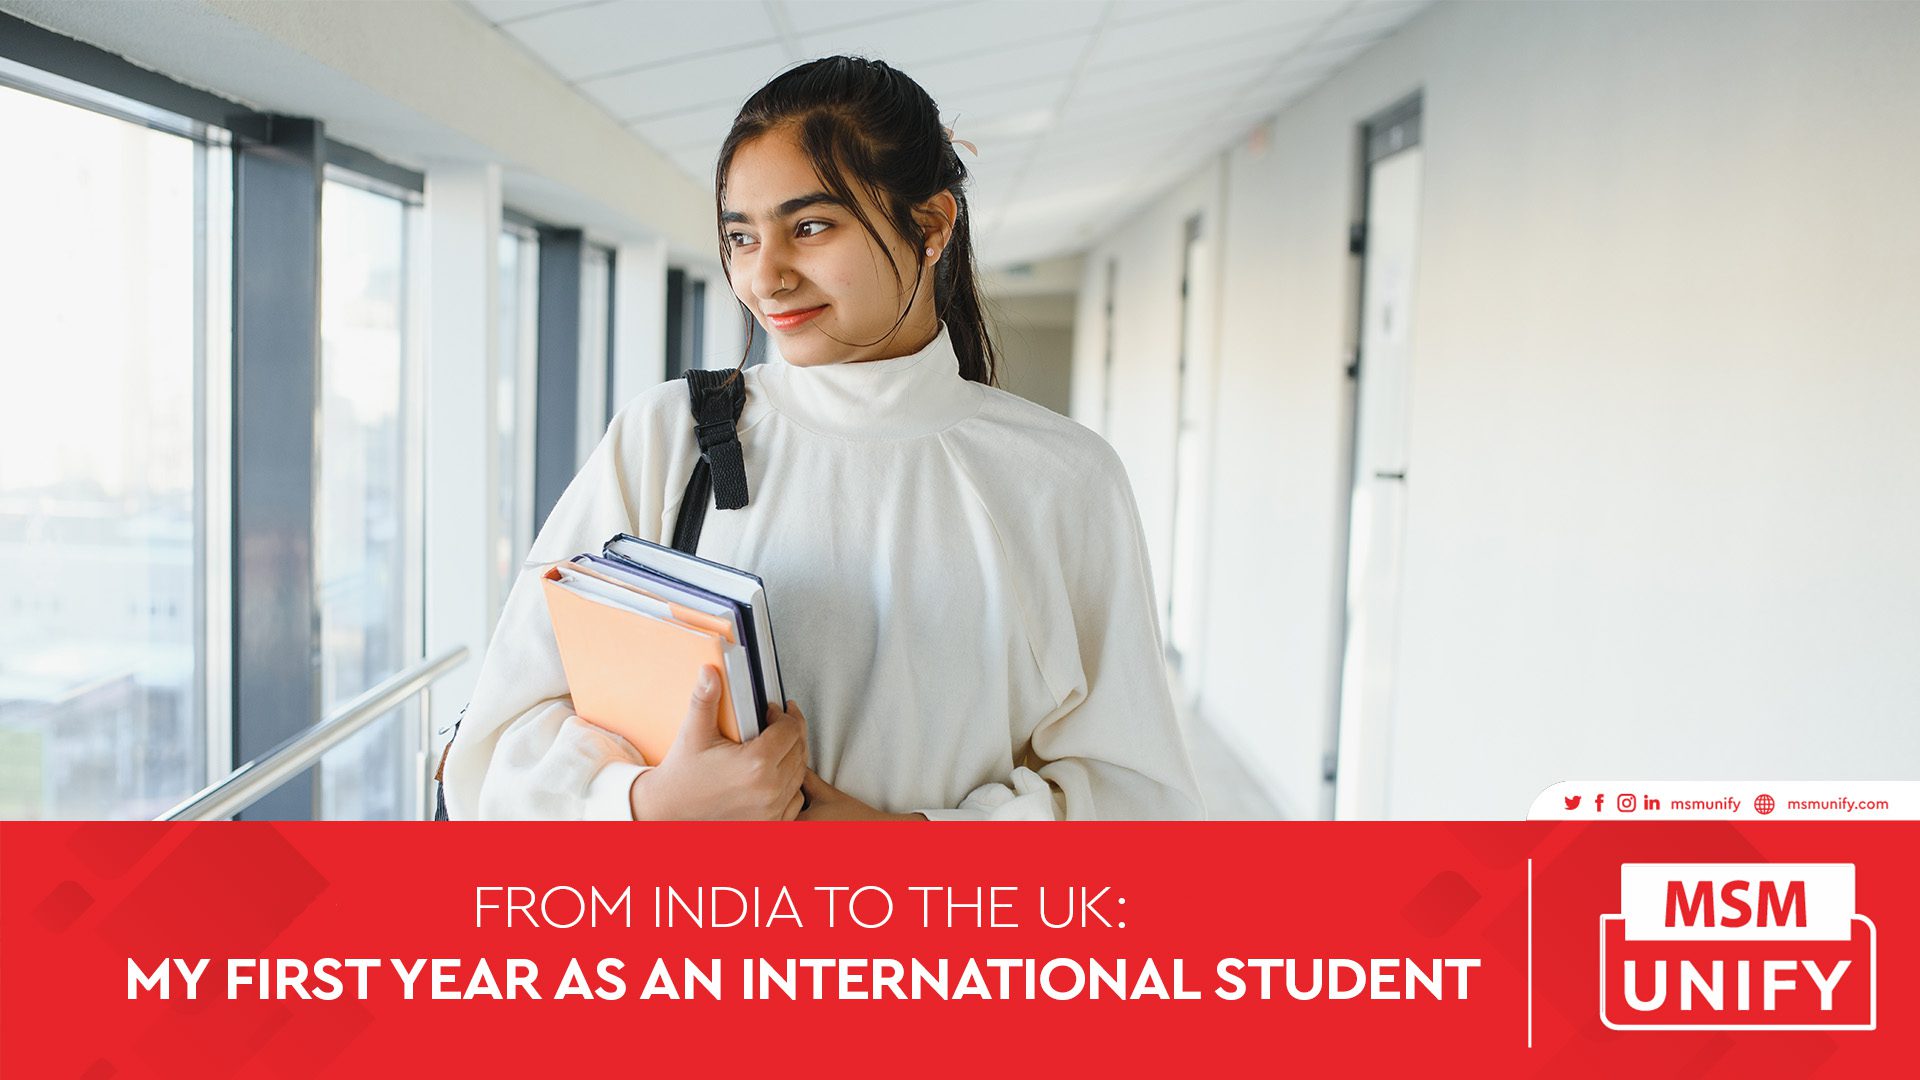 011823 MSM Unify From India to the UK my first year as an international student 1920x1080